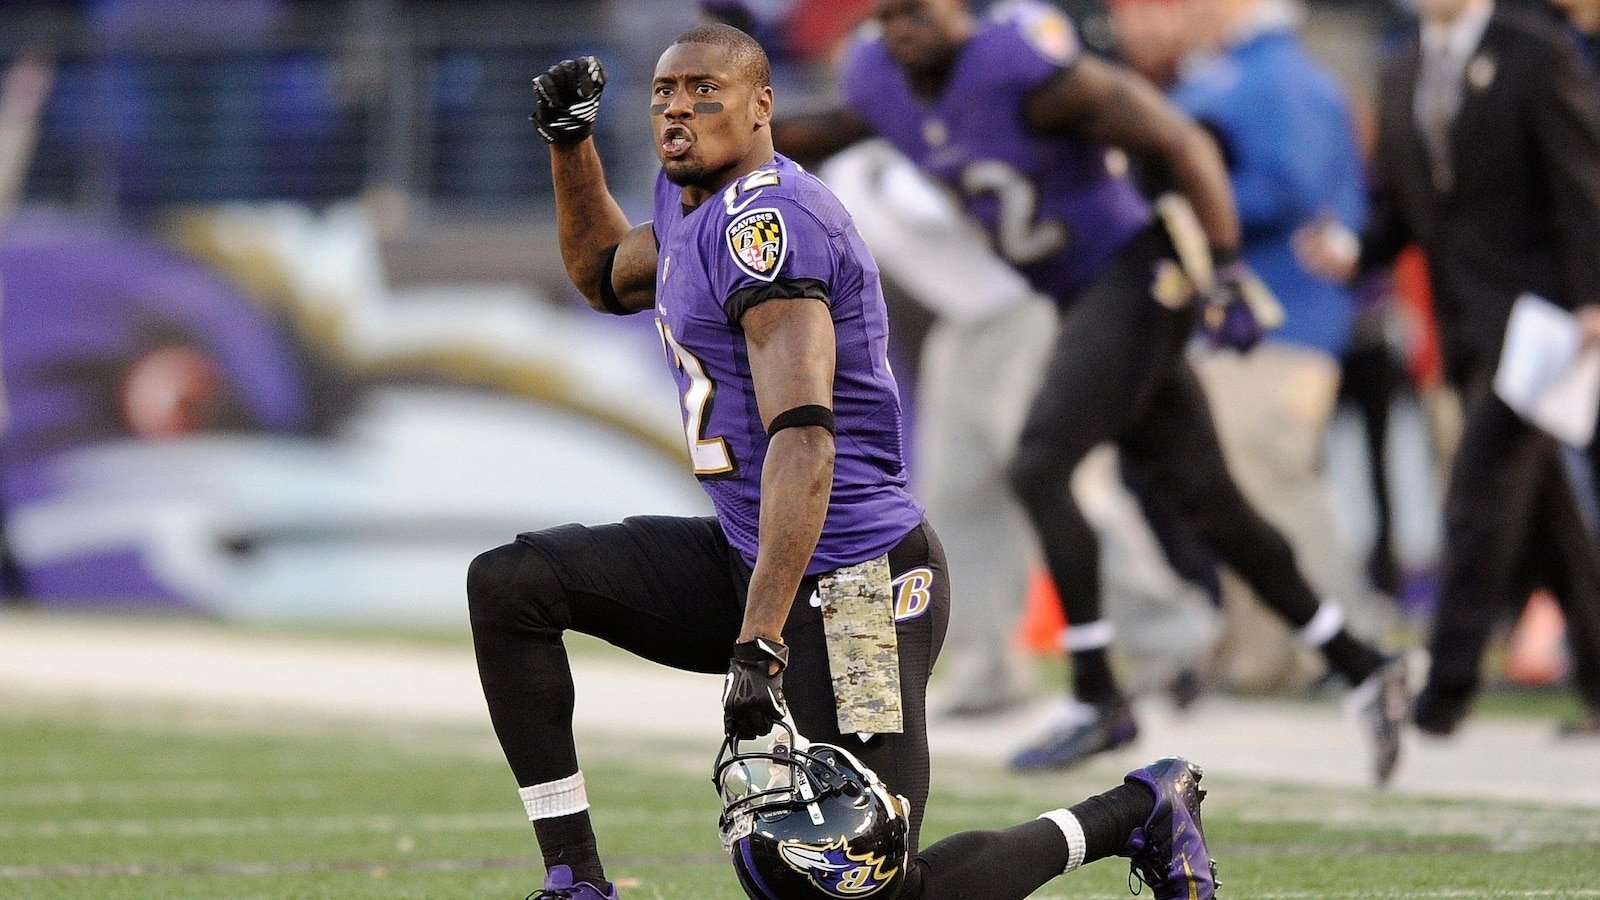 Jacoby Jones, a star of Baltimore's most recent Super Bowl title, has died at age 40